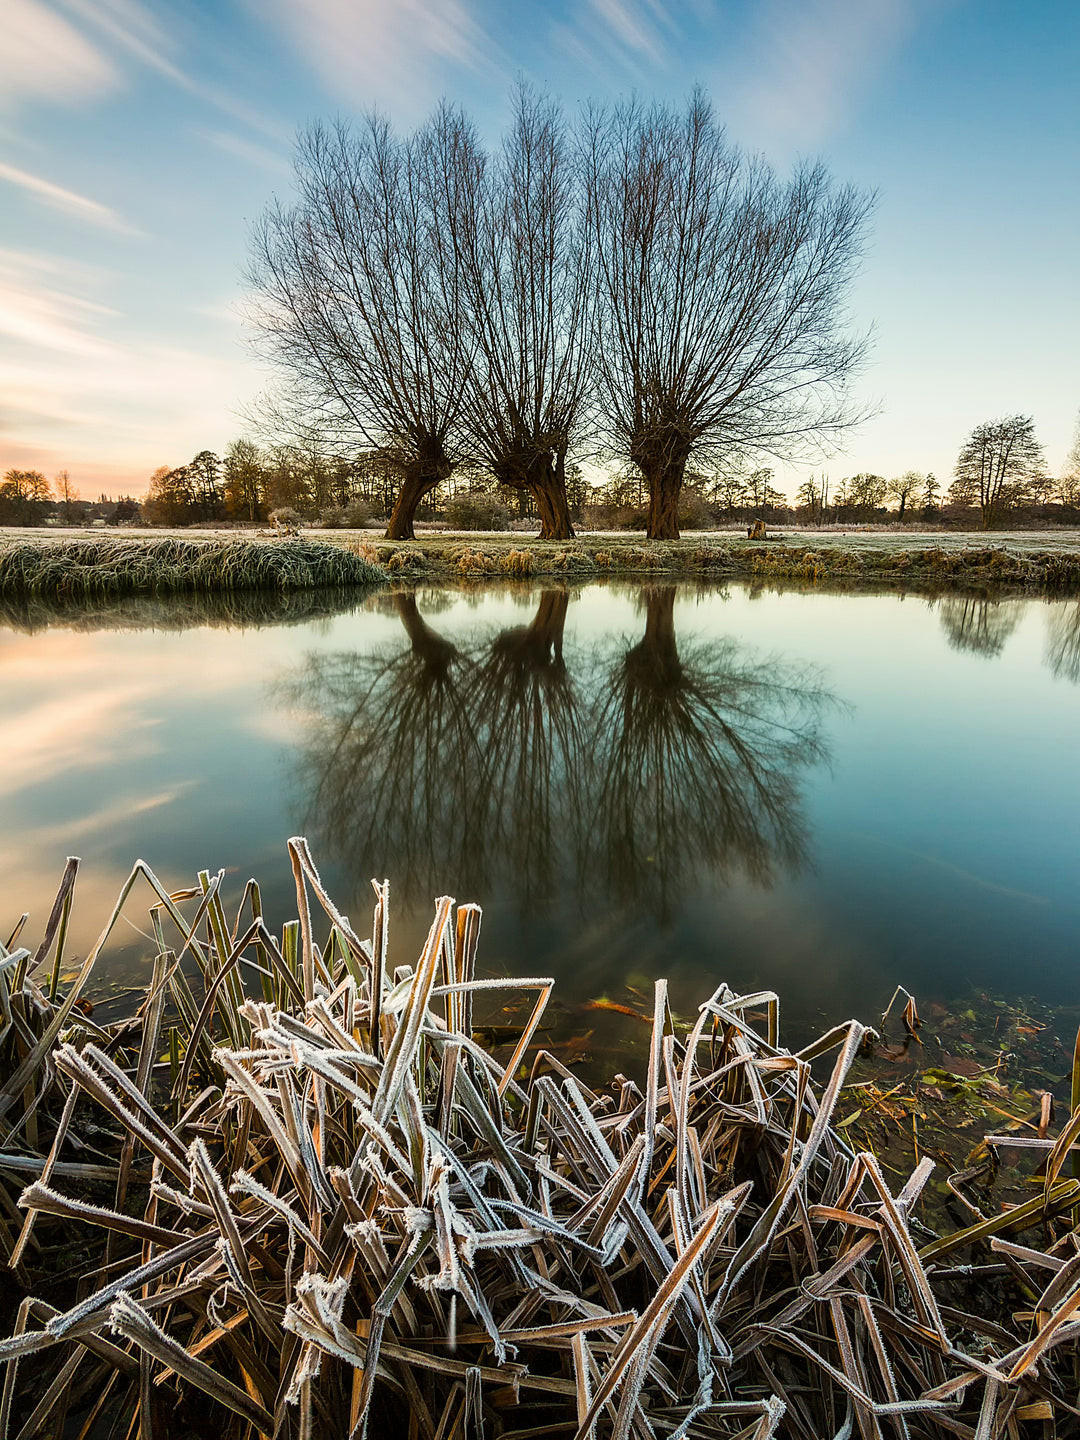 A frosty sunrise in the Suffolk countryside Photo Print - Canvas - Framed Photo Print - Hampshire Prints